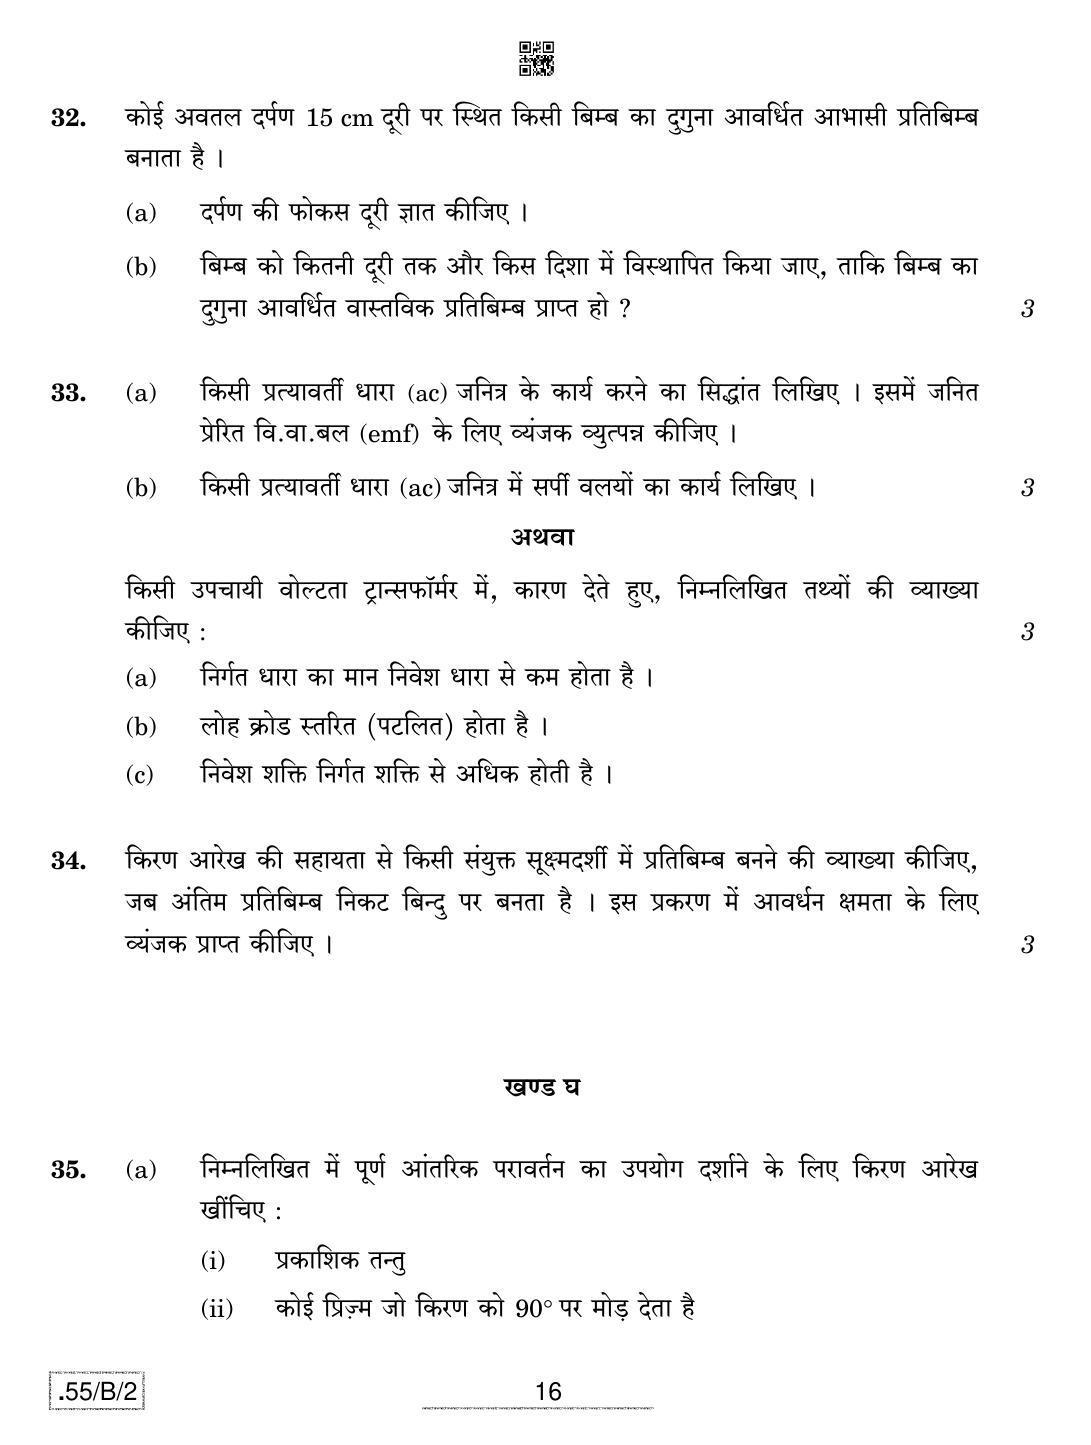 CBSE Class 12 55-C-2 - Physics 2020 Compartment Question Paper - Page 16